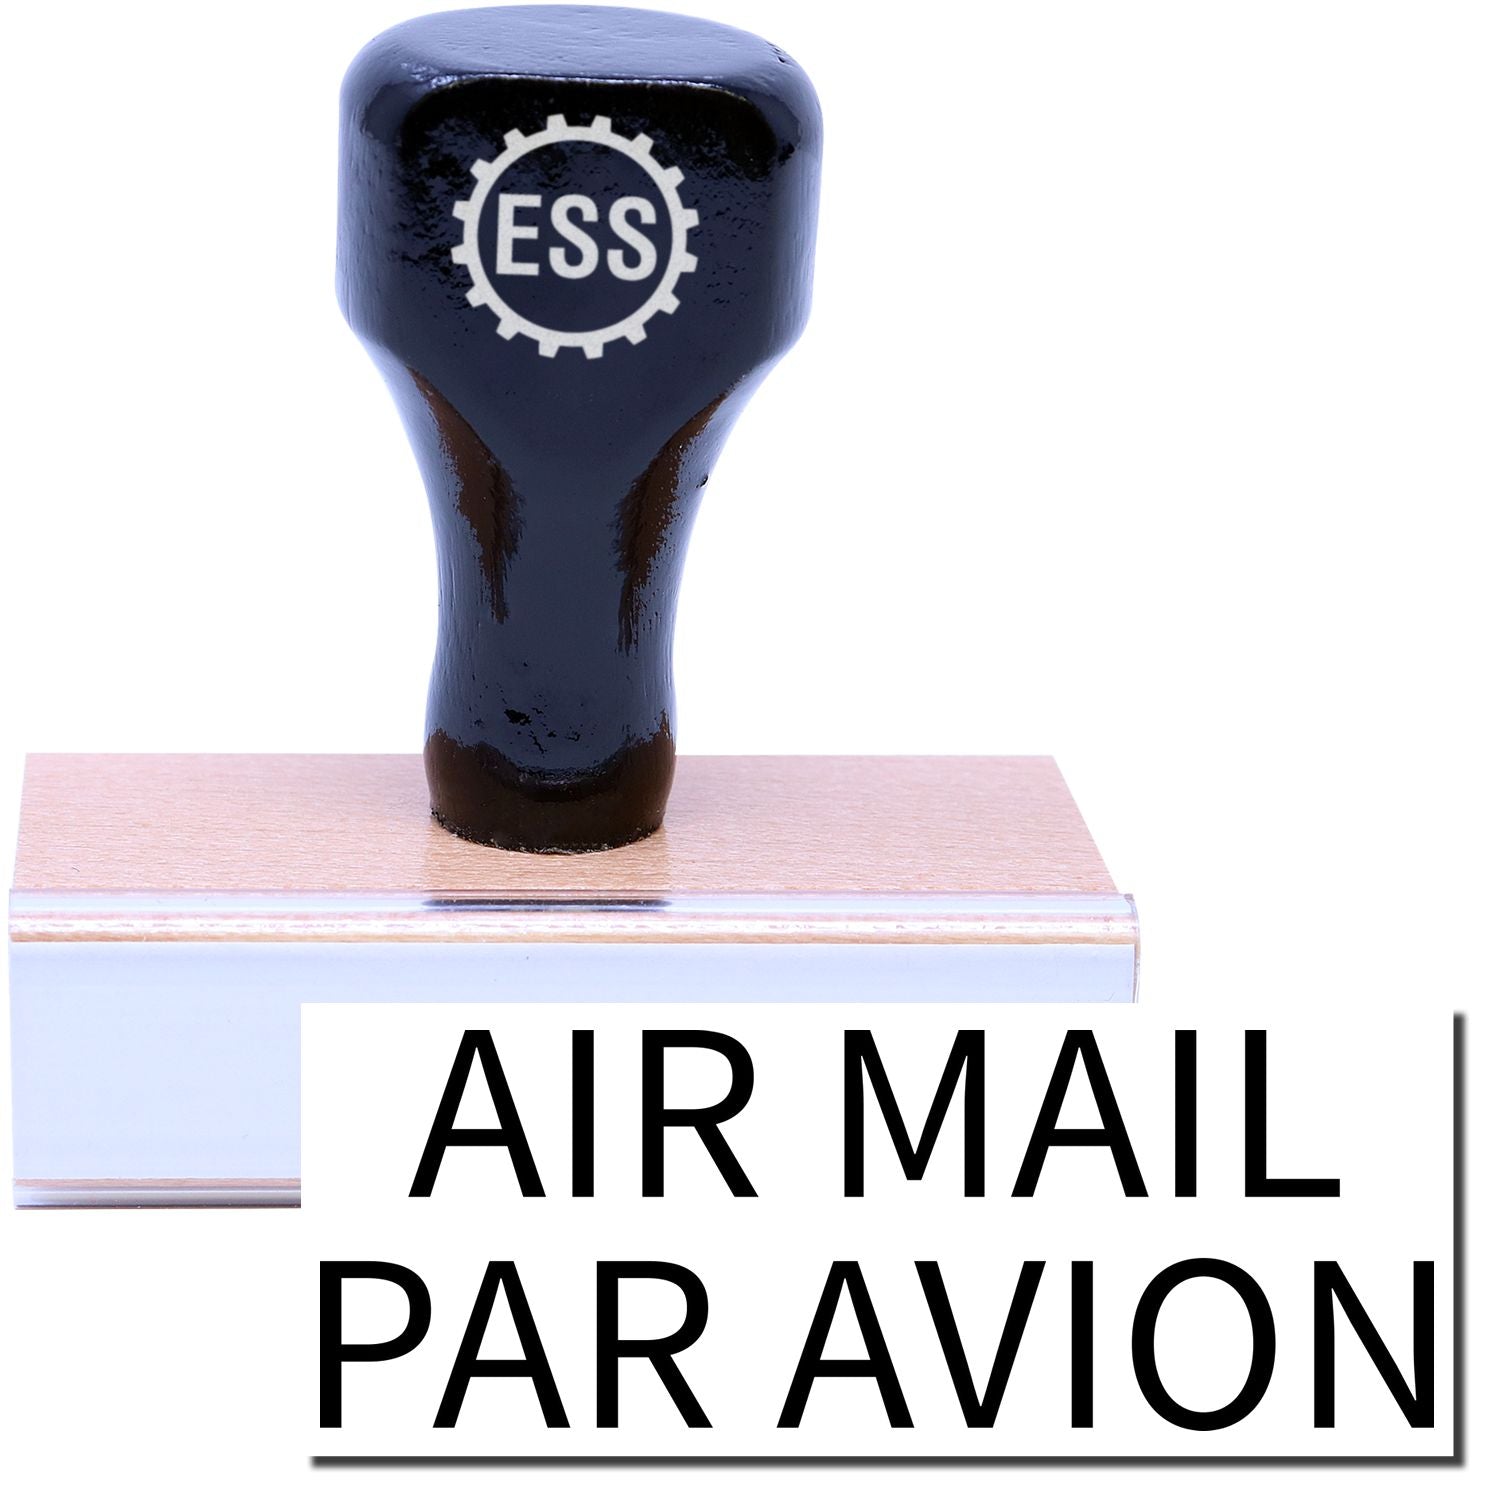 A stock office rubber stamp with a stamped image showing how the text "AIR MAIL PAR AVION" is displayed after stamping.